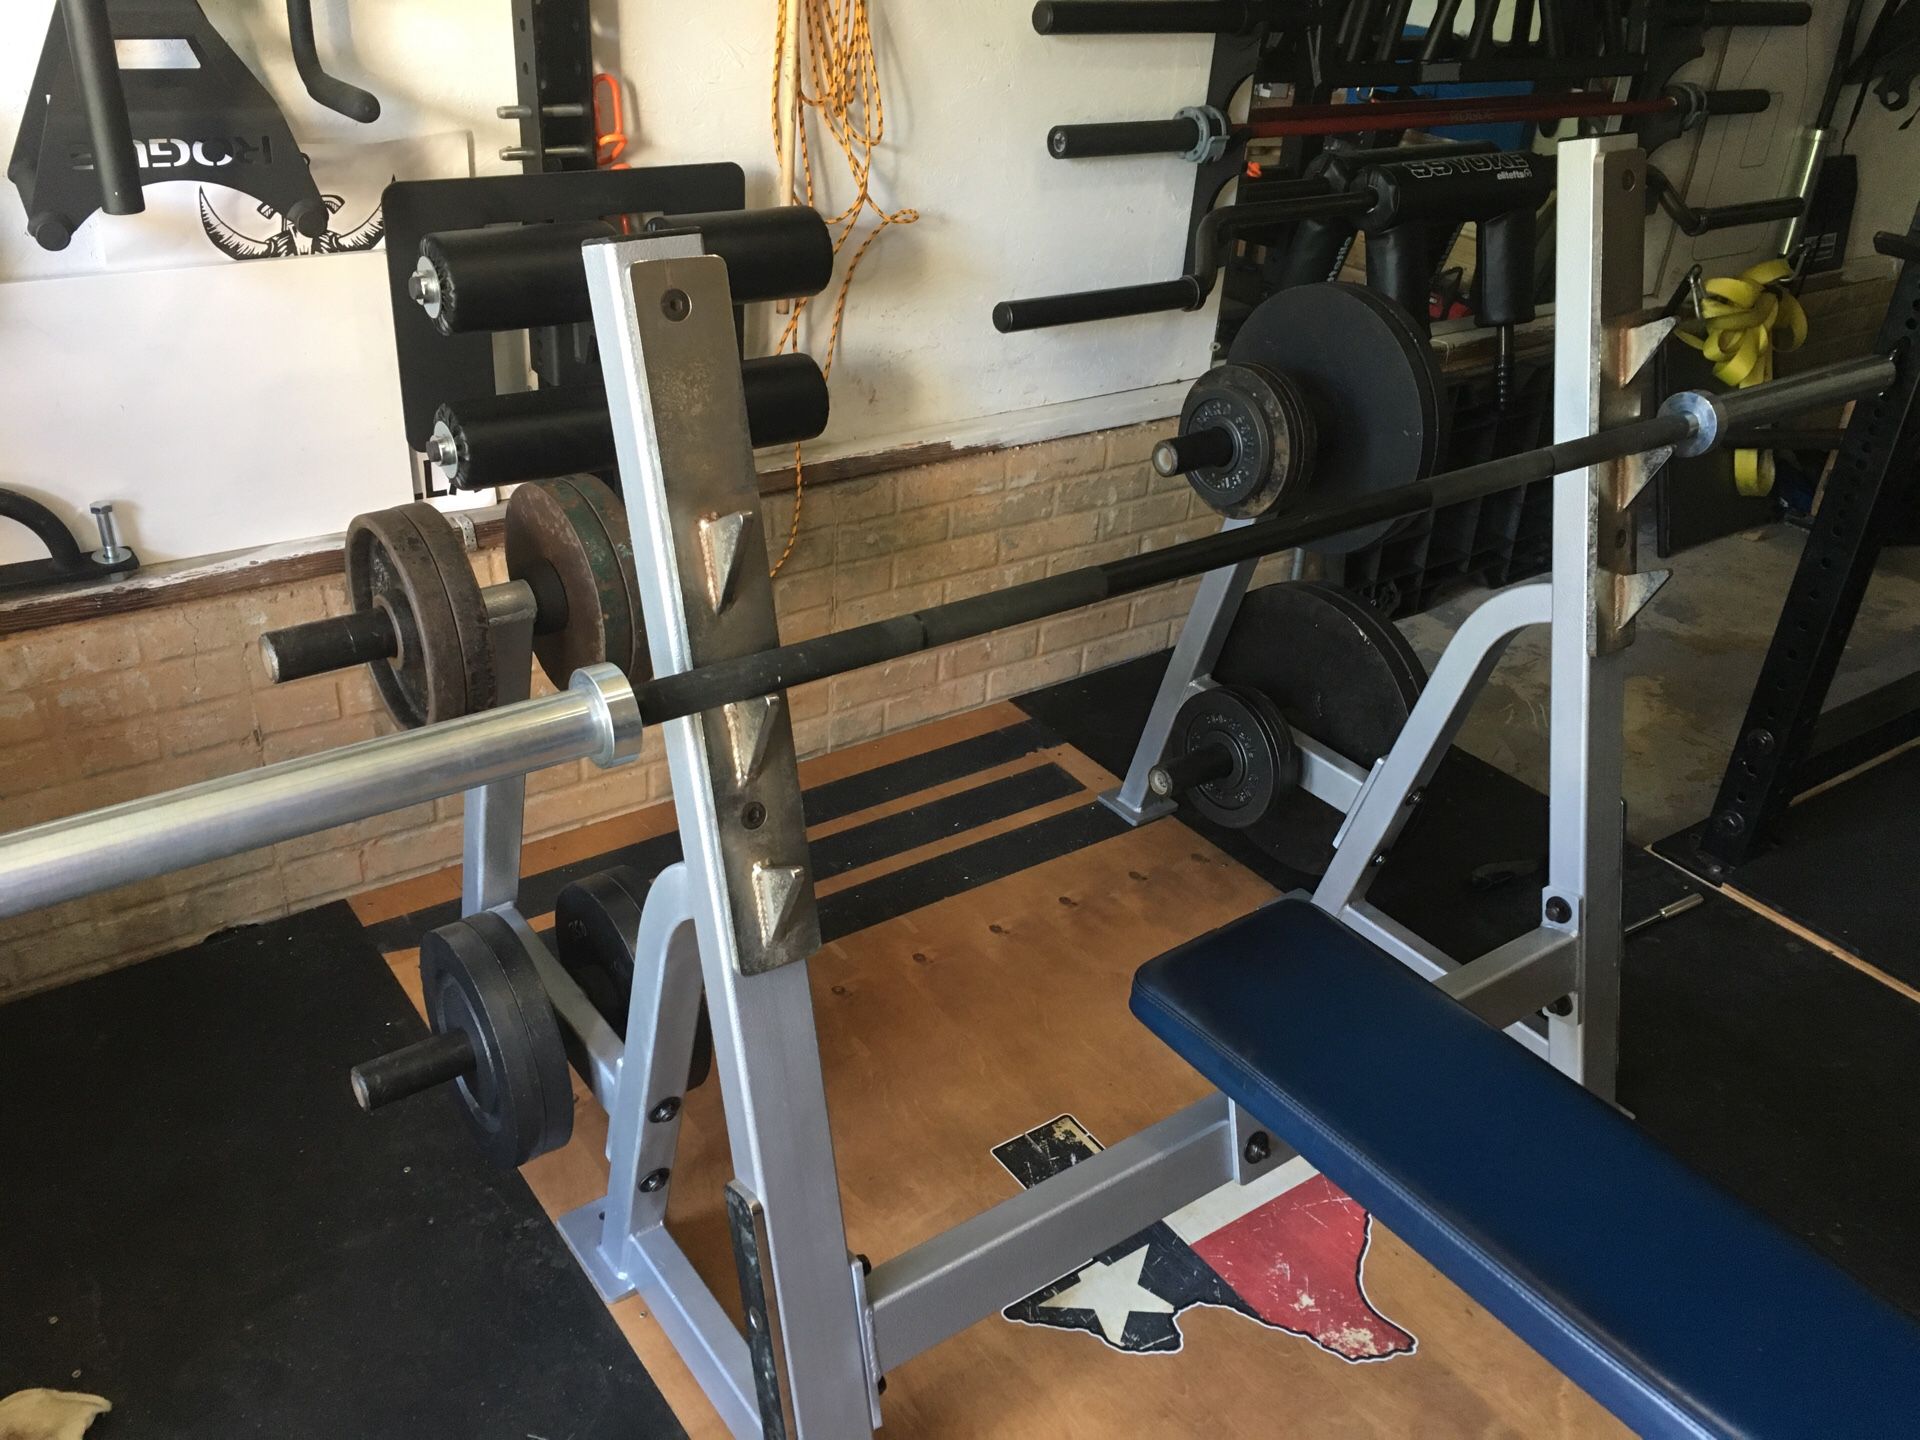 Hoist Olympic style Flat Bench press with Rogue Beater bar and weight